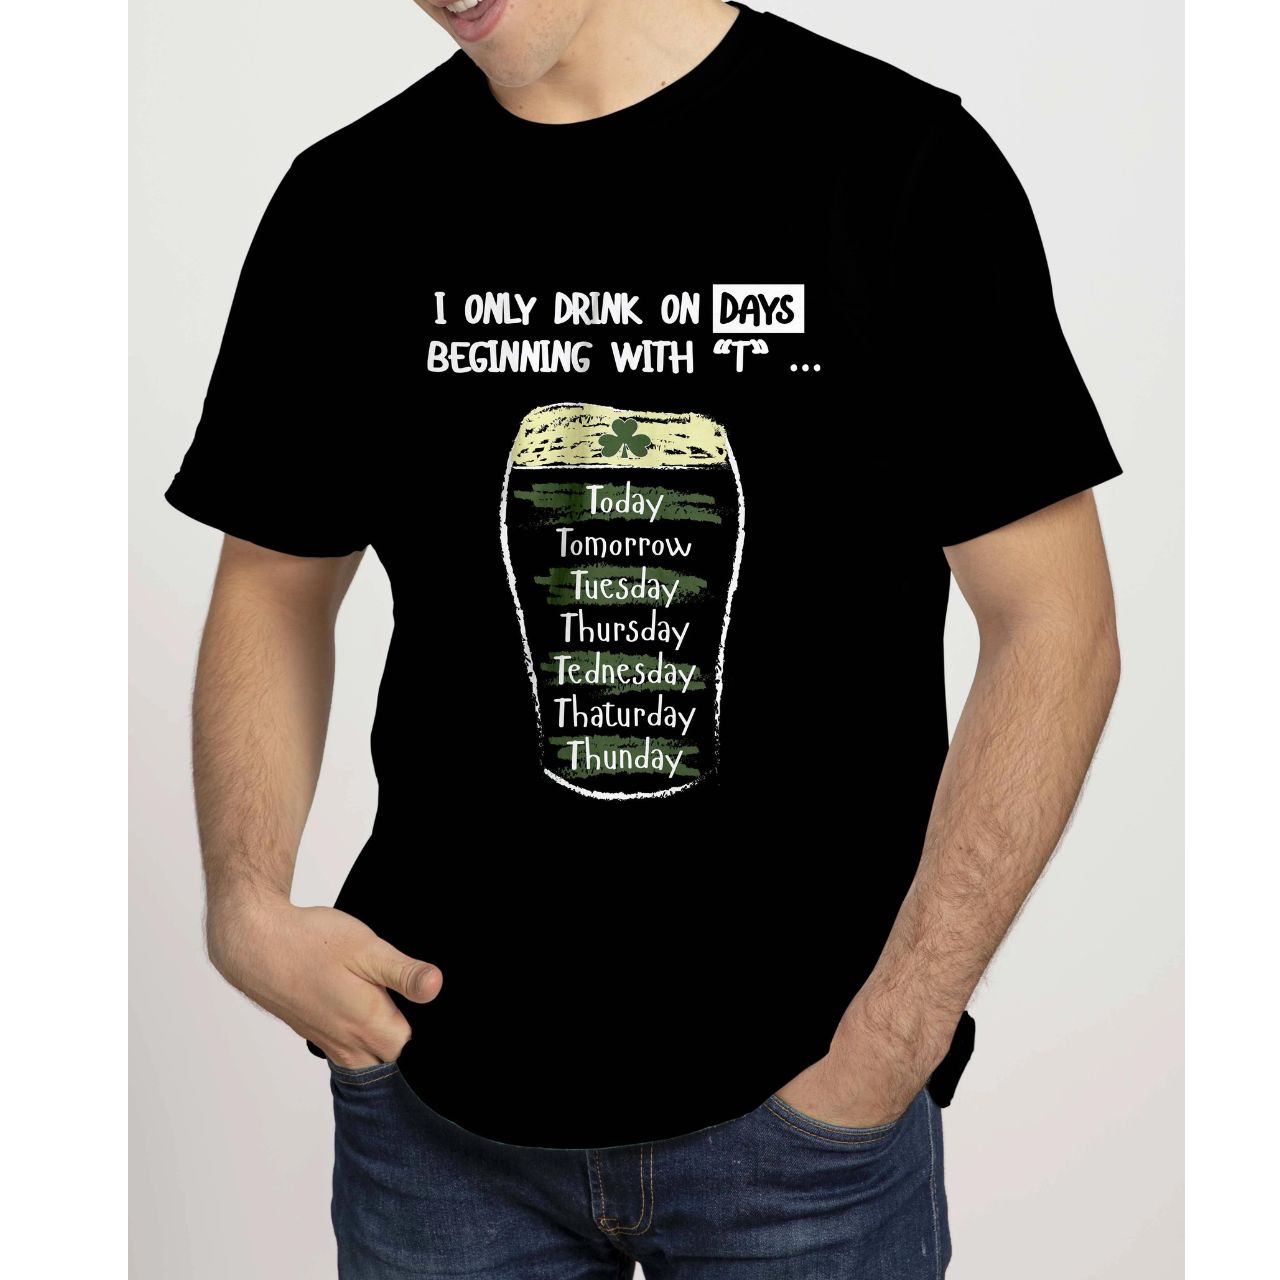 Black Adult Drinking Days Beginning With ‘T’ T-Shirt  - 100% cotton - Ash 99% cotton,1% polyester - Heather Grey 97% cotton, 3% polyester - Crew Neck - Designed And Printed in Ireland By Cara craft - Machine Washable